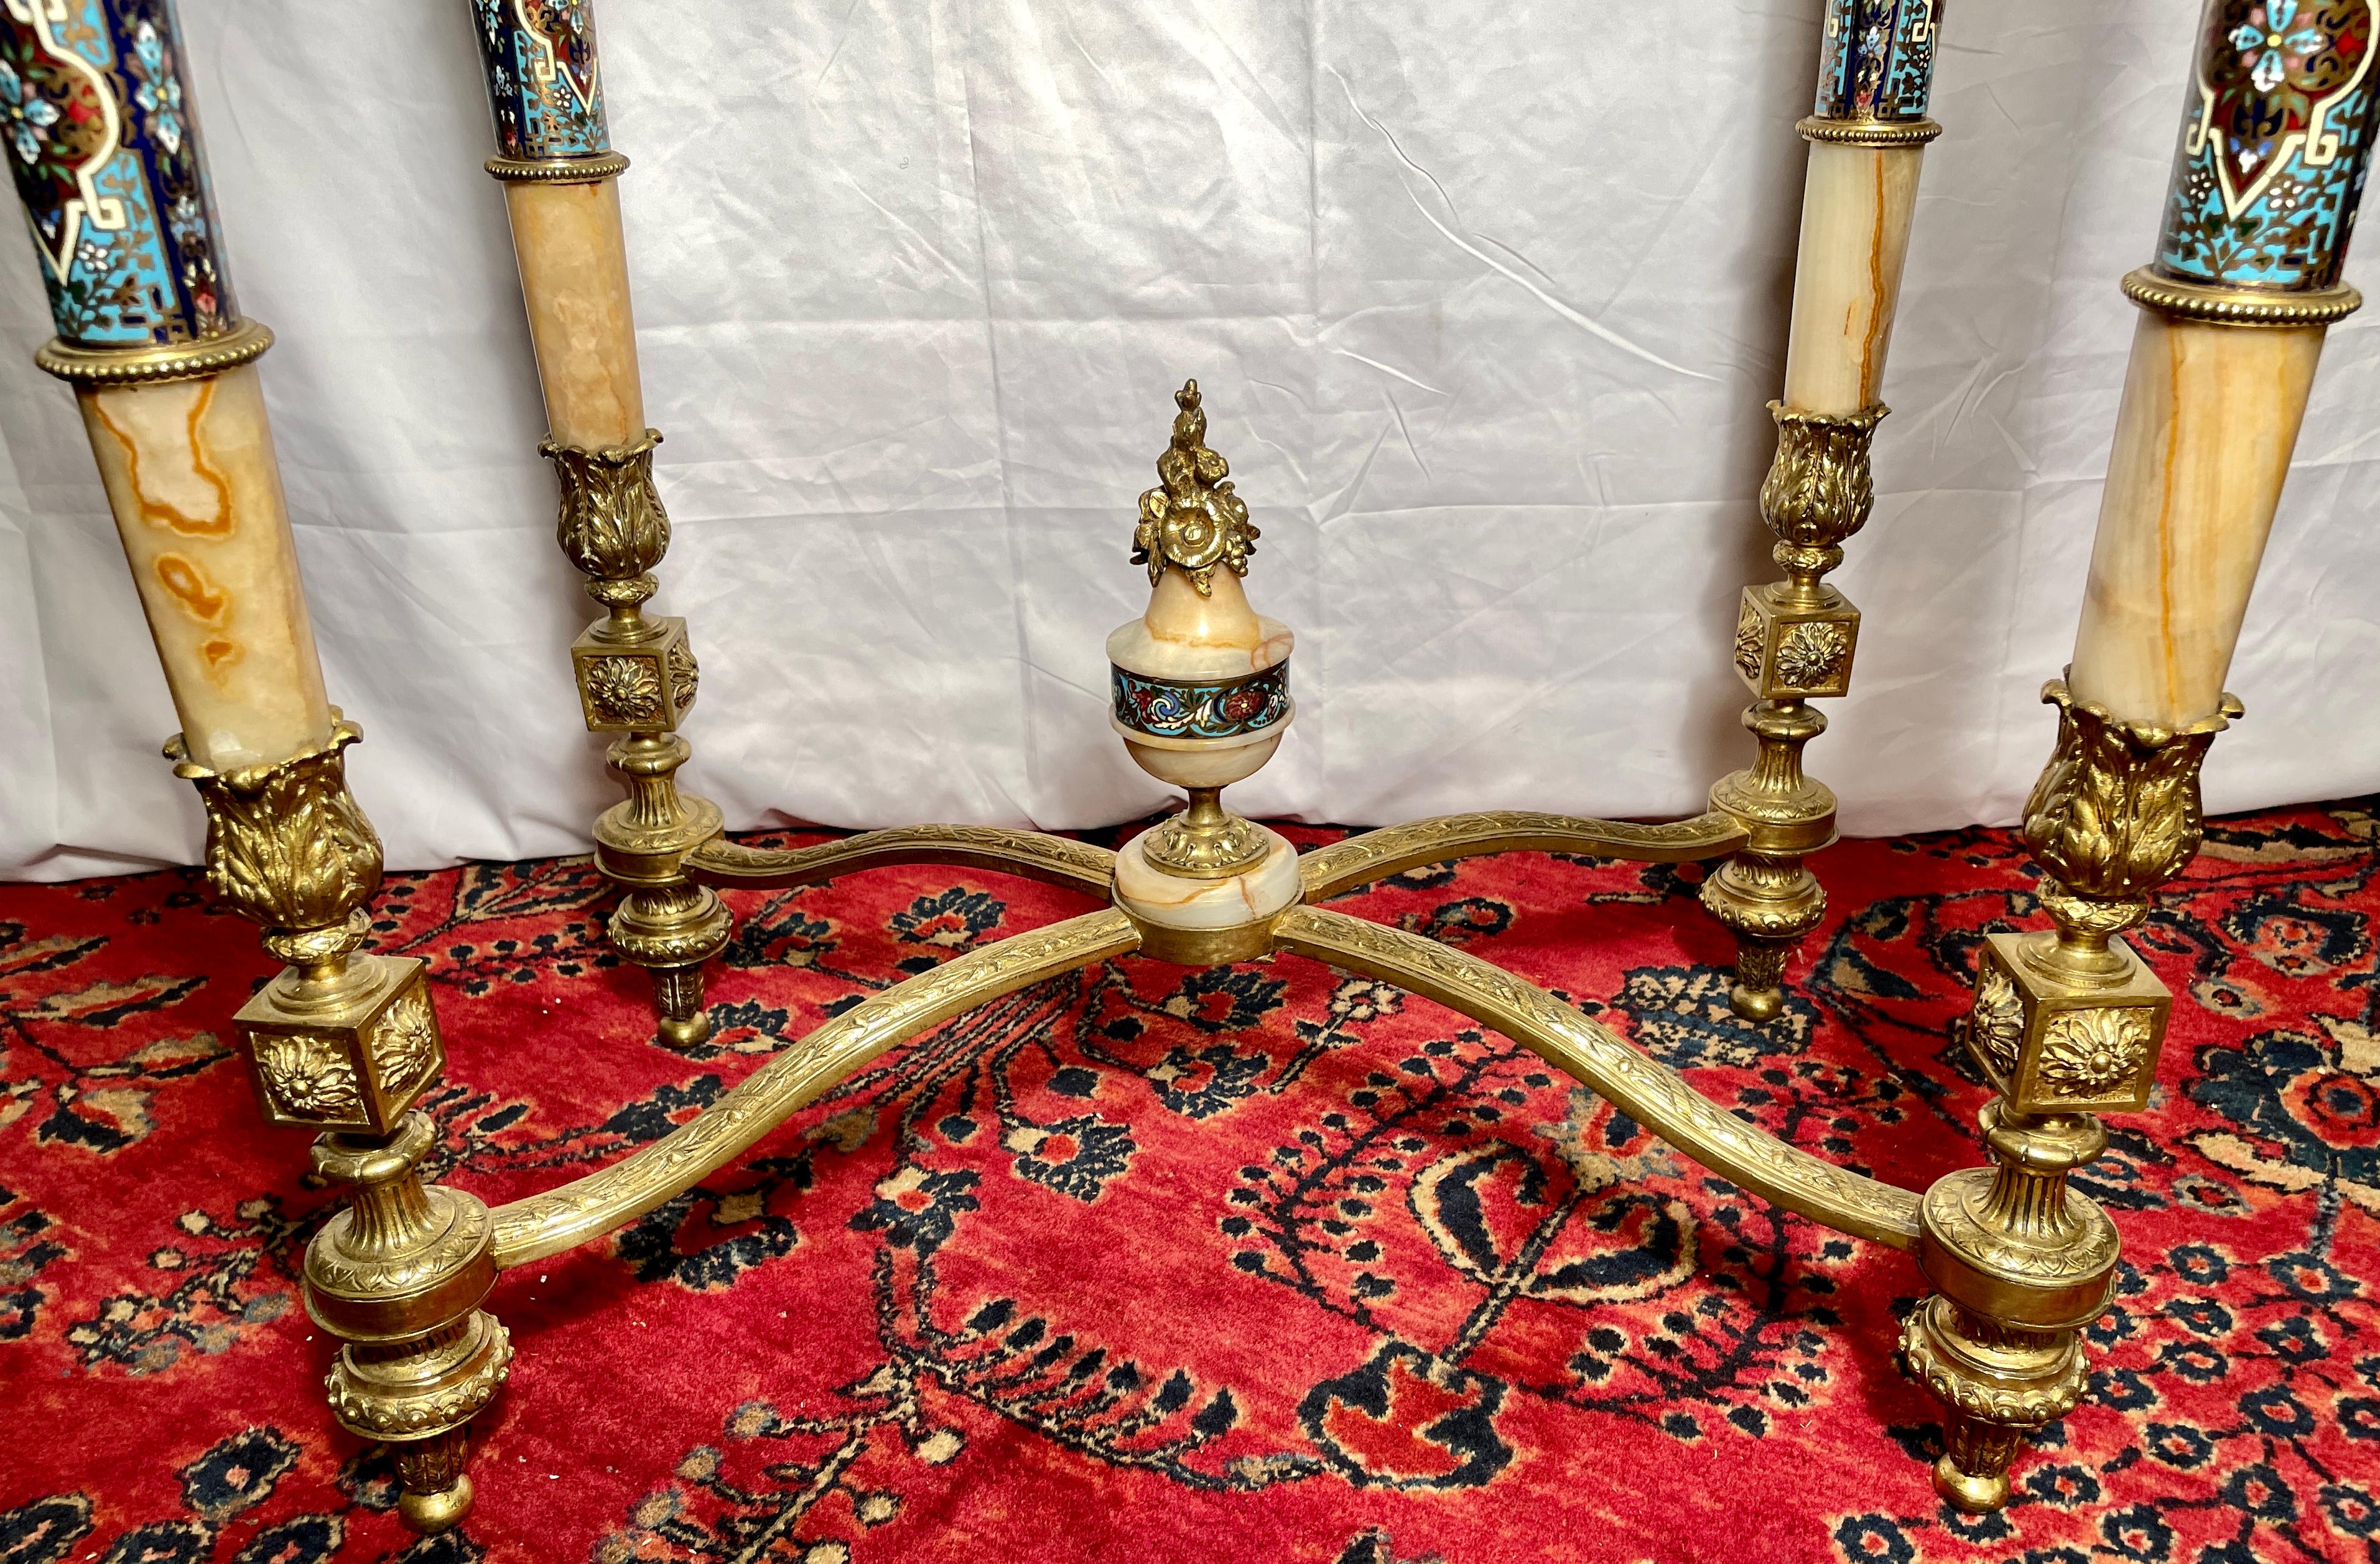 Antique Russian Onyx Marble, Ormolu and Enamel Porcelain Table, Circa 1875-1885 For Sale 1